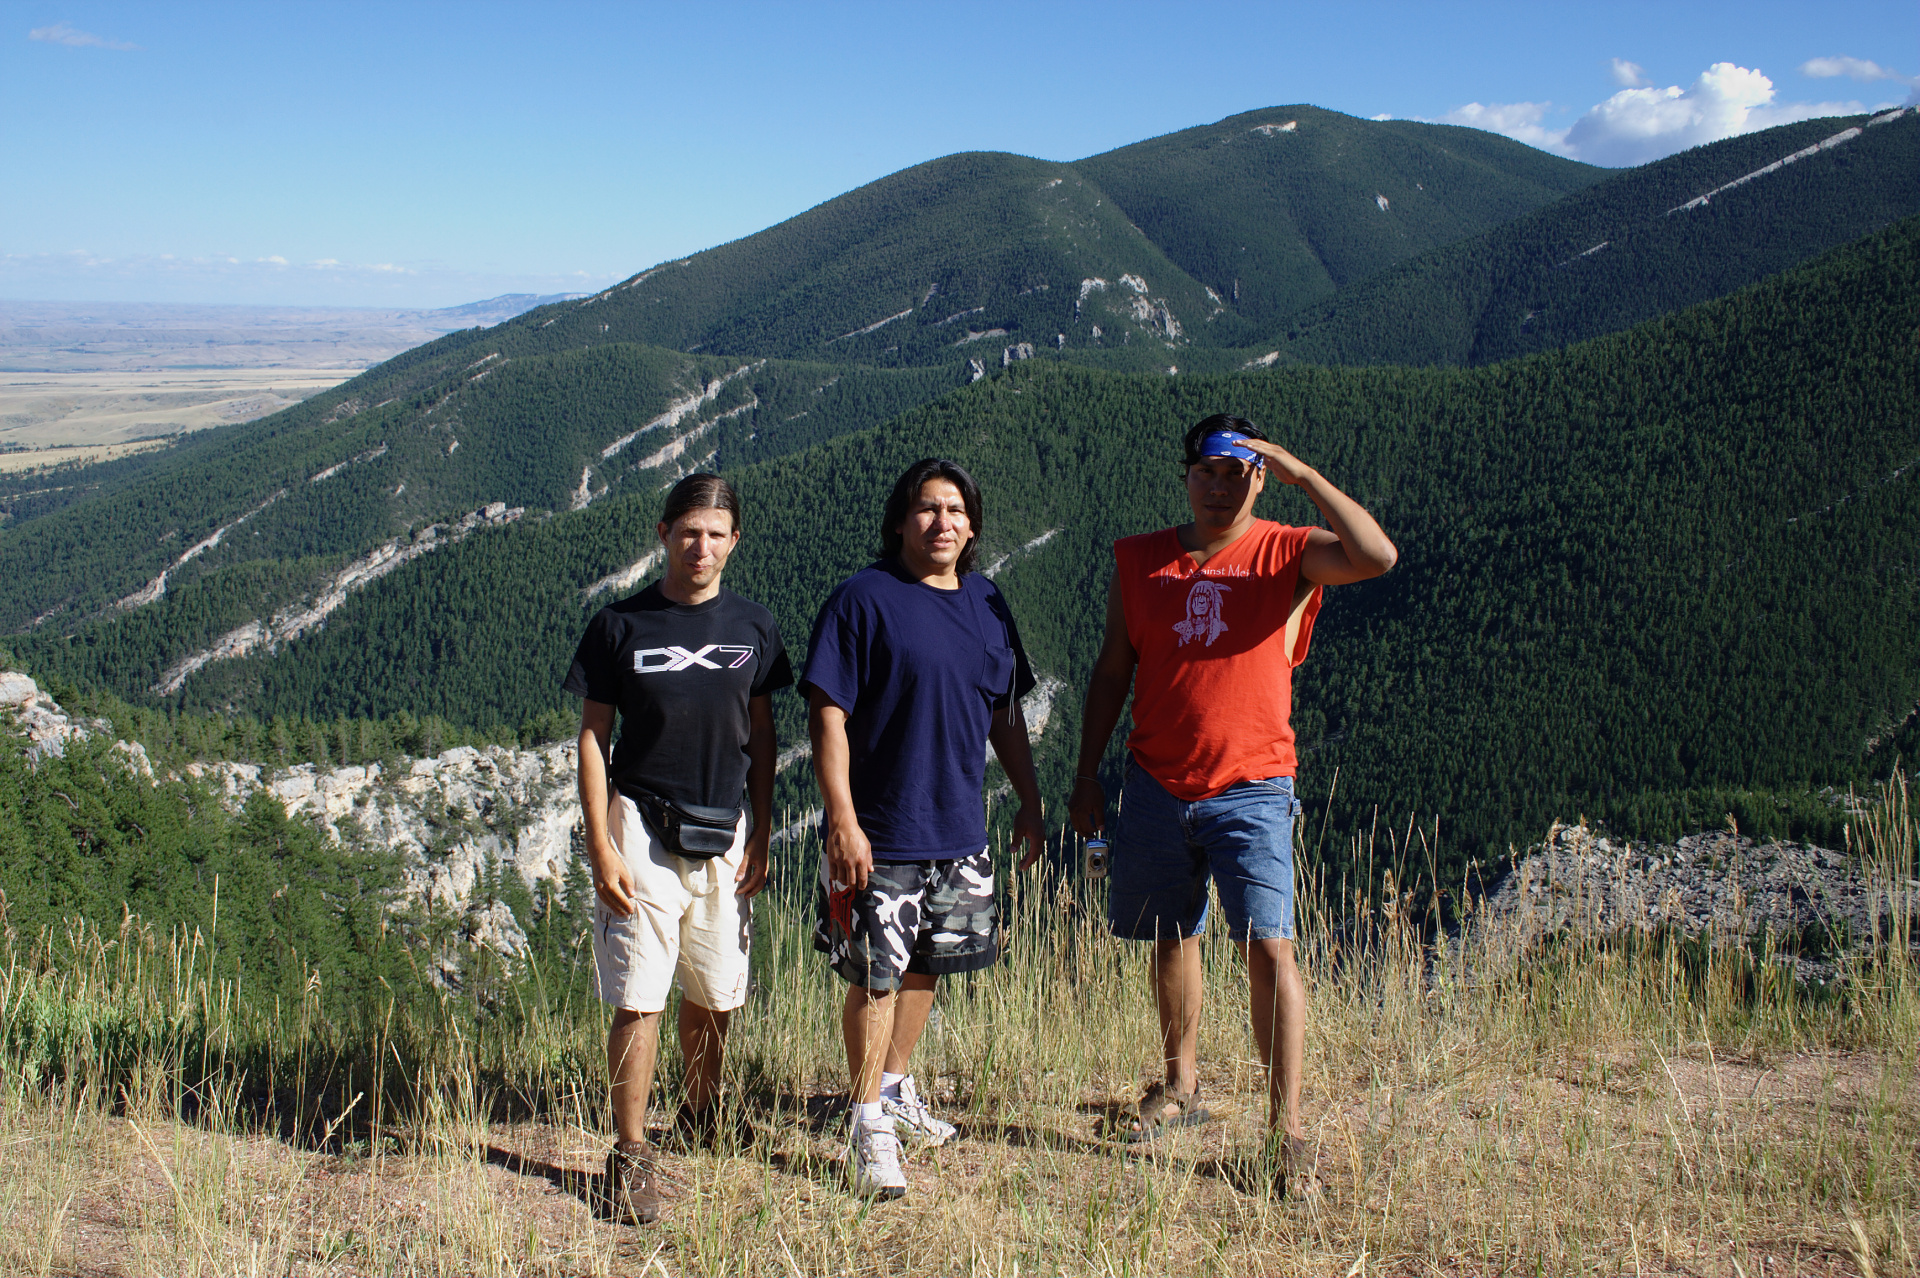 Me, Rufus and Gene (Travels » US Trip 1: Cheyenne Country » The Journey » Bighorn Mountains)